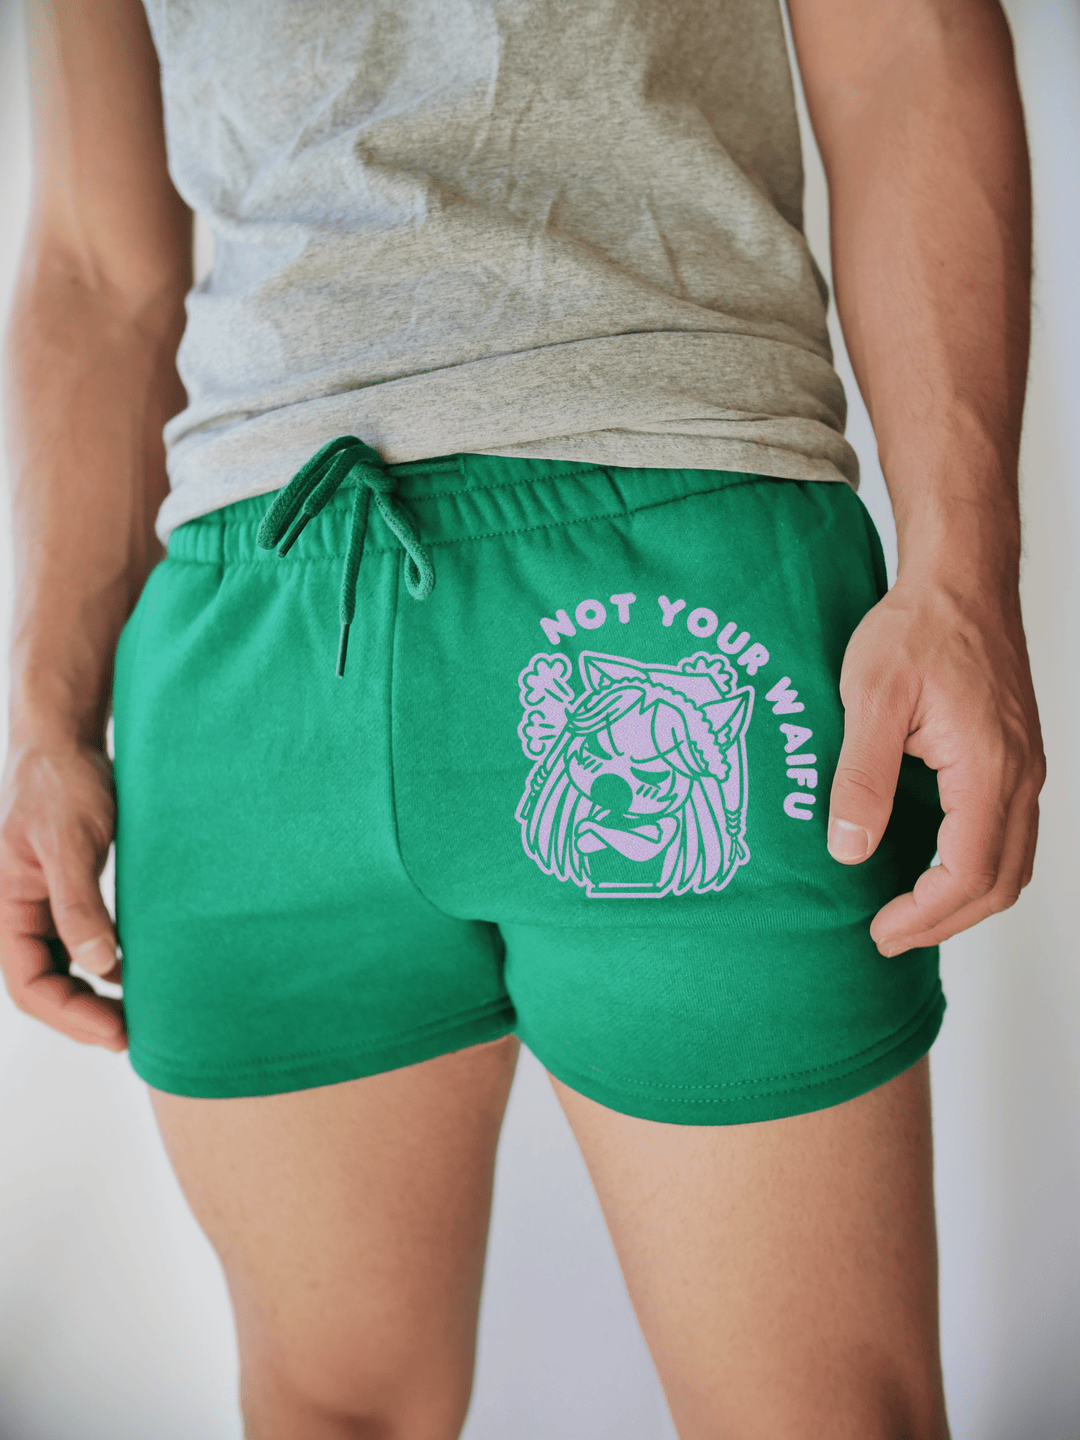 PixelThat Punderwear Shorts Kelly Green / S / Front Not Your Waifu Men's Gym Shorts